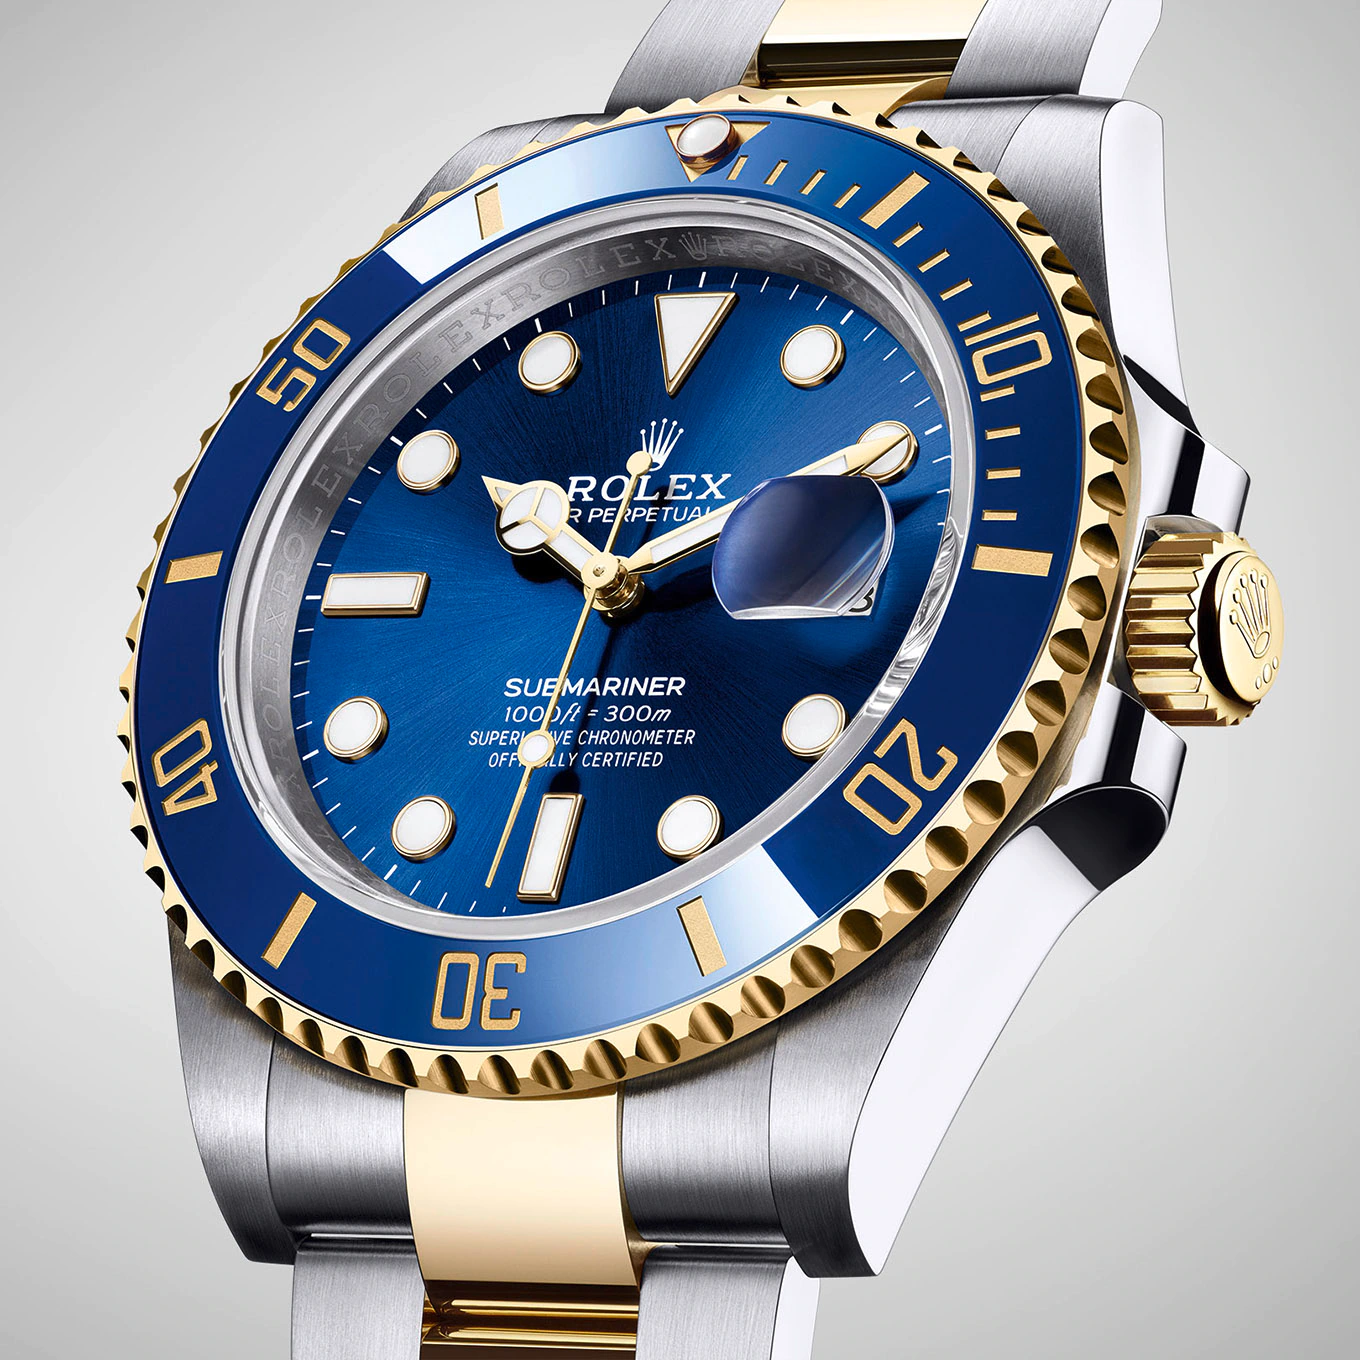 Rolex Submariner Date, Stainless Steel and 18k Yellow Gold, 41mm, Ref# 126613lb-0002, Right